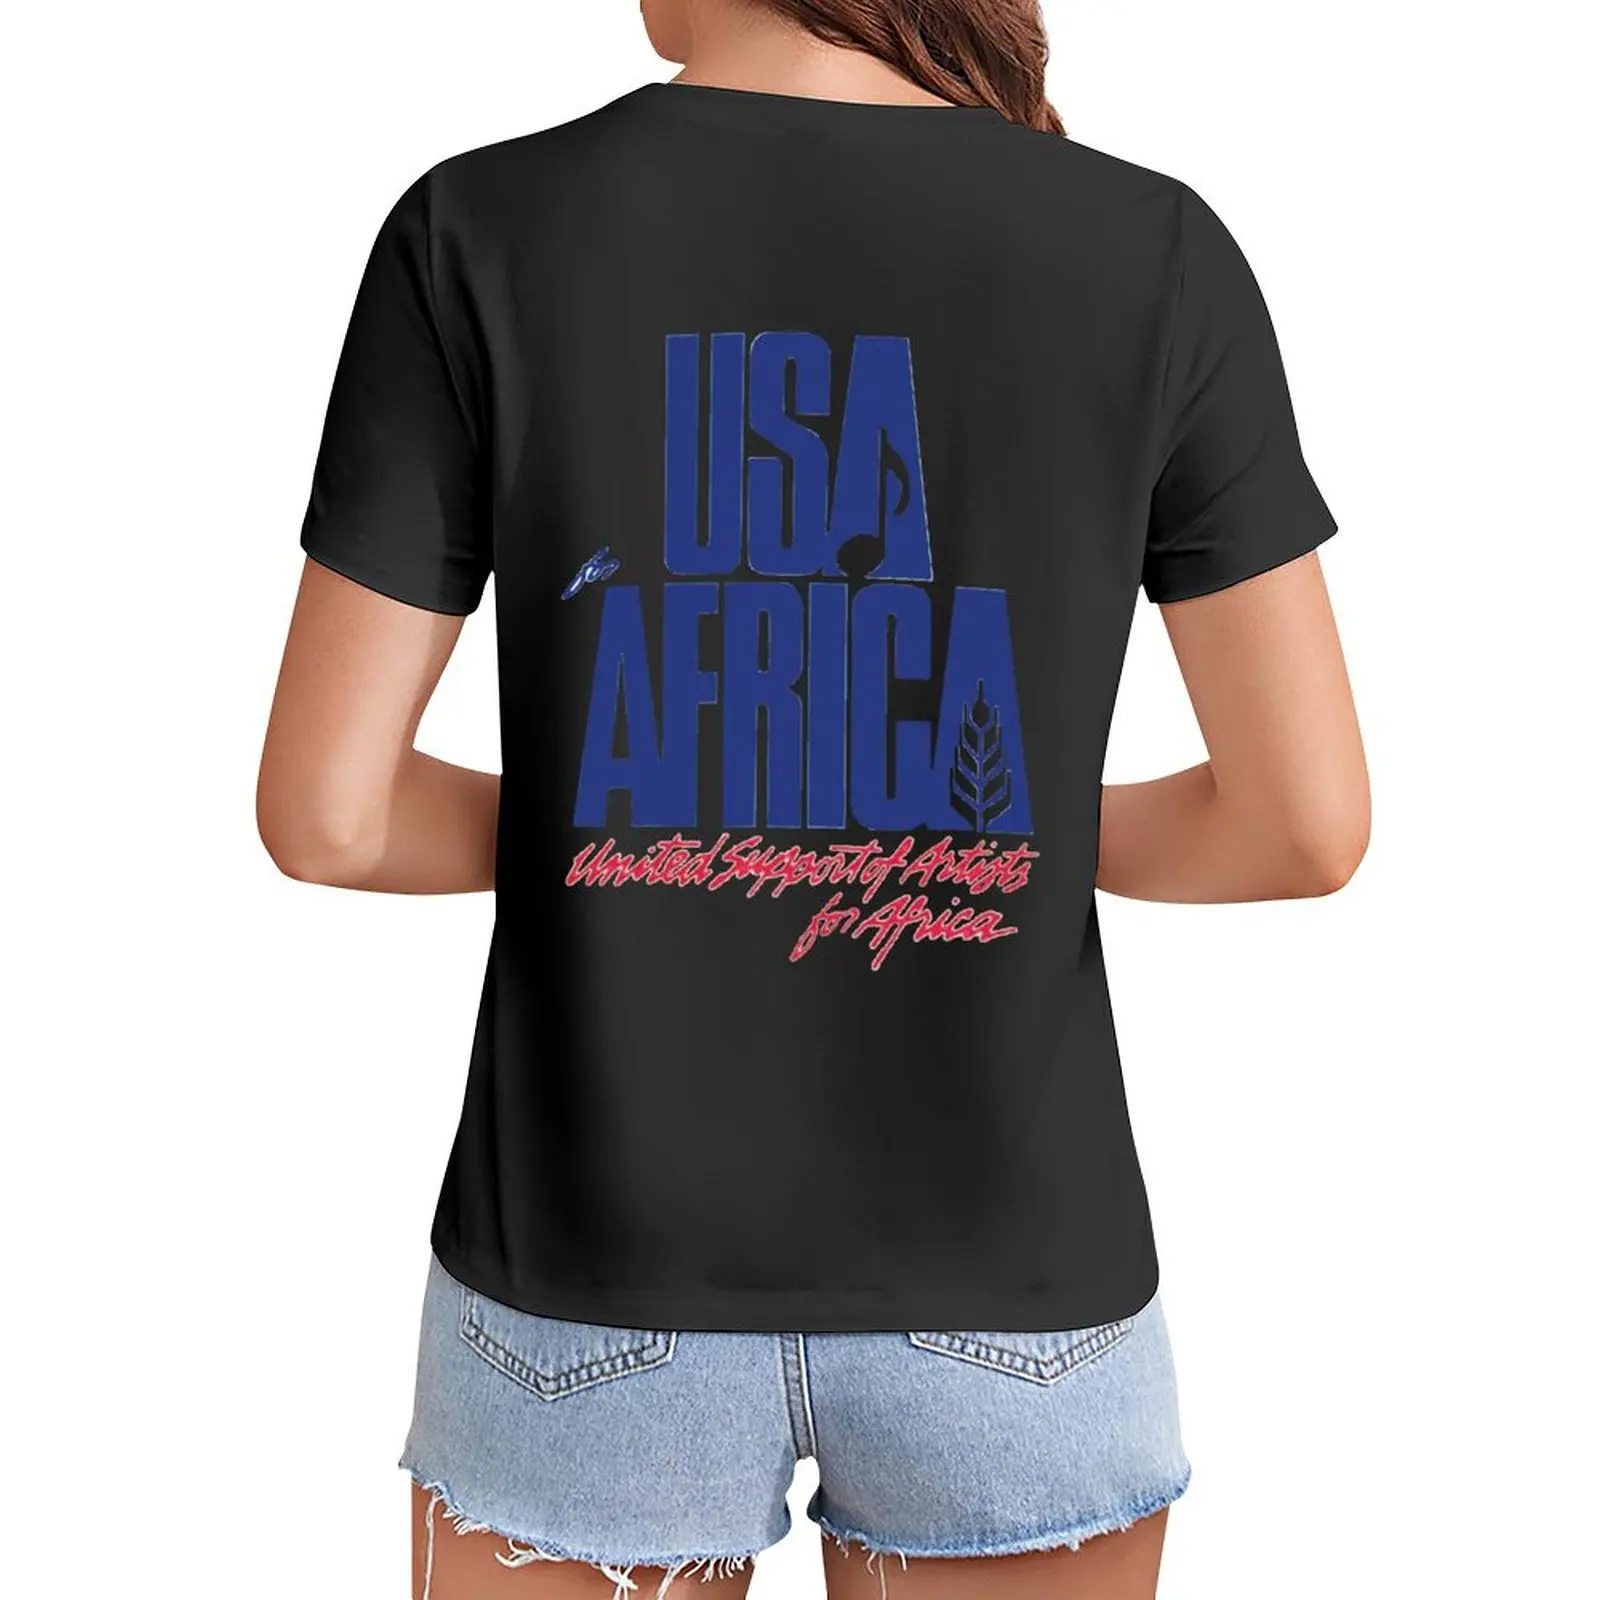 

We Are the World T-Shirt vintage clothes shirts graphic tees quick-drying clothes for woman